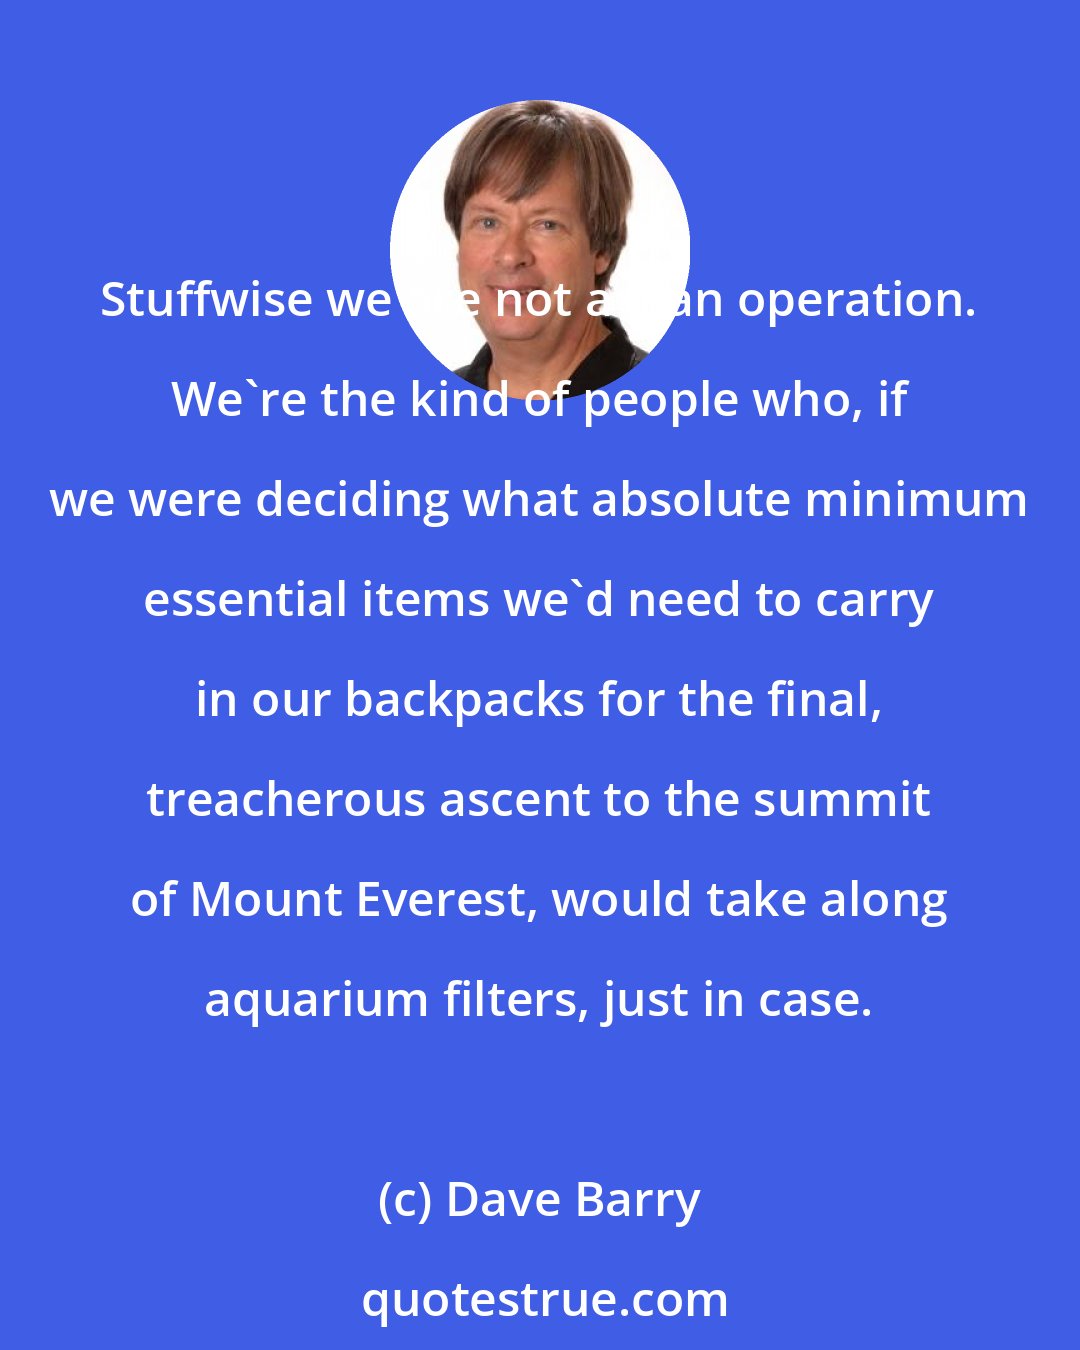 Dave Barry: Stuffwise we are not a lean operation. We're the kind of people who, if we were deciding what absolute minimum essential items we'd need to carry in our backpacks for the final, treacherous ascent to the summit of Mount Everest, would take along aquarium filters, just in case.